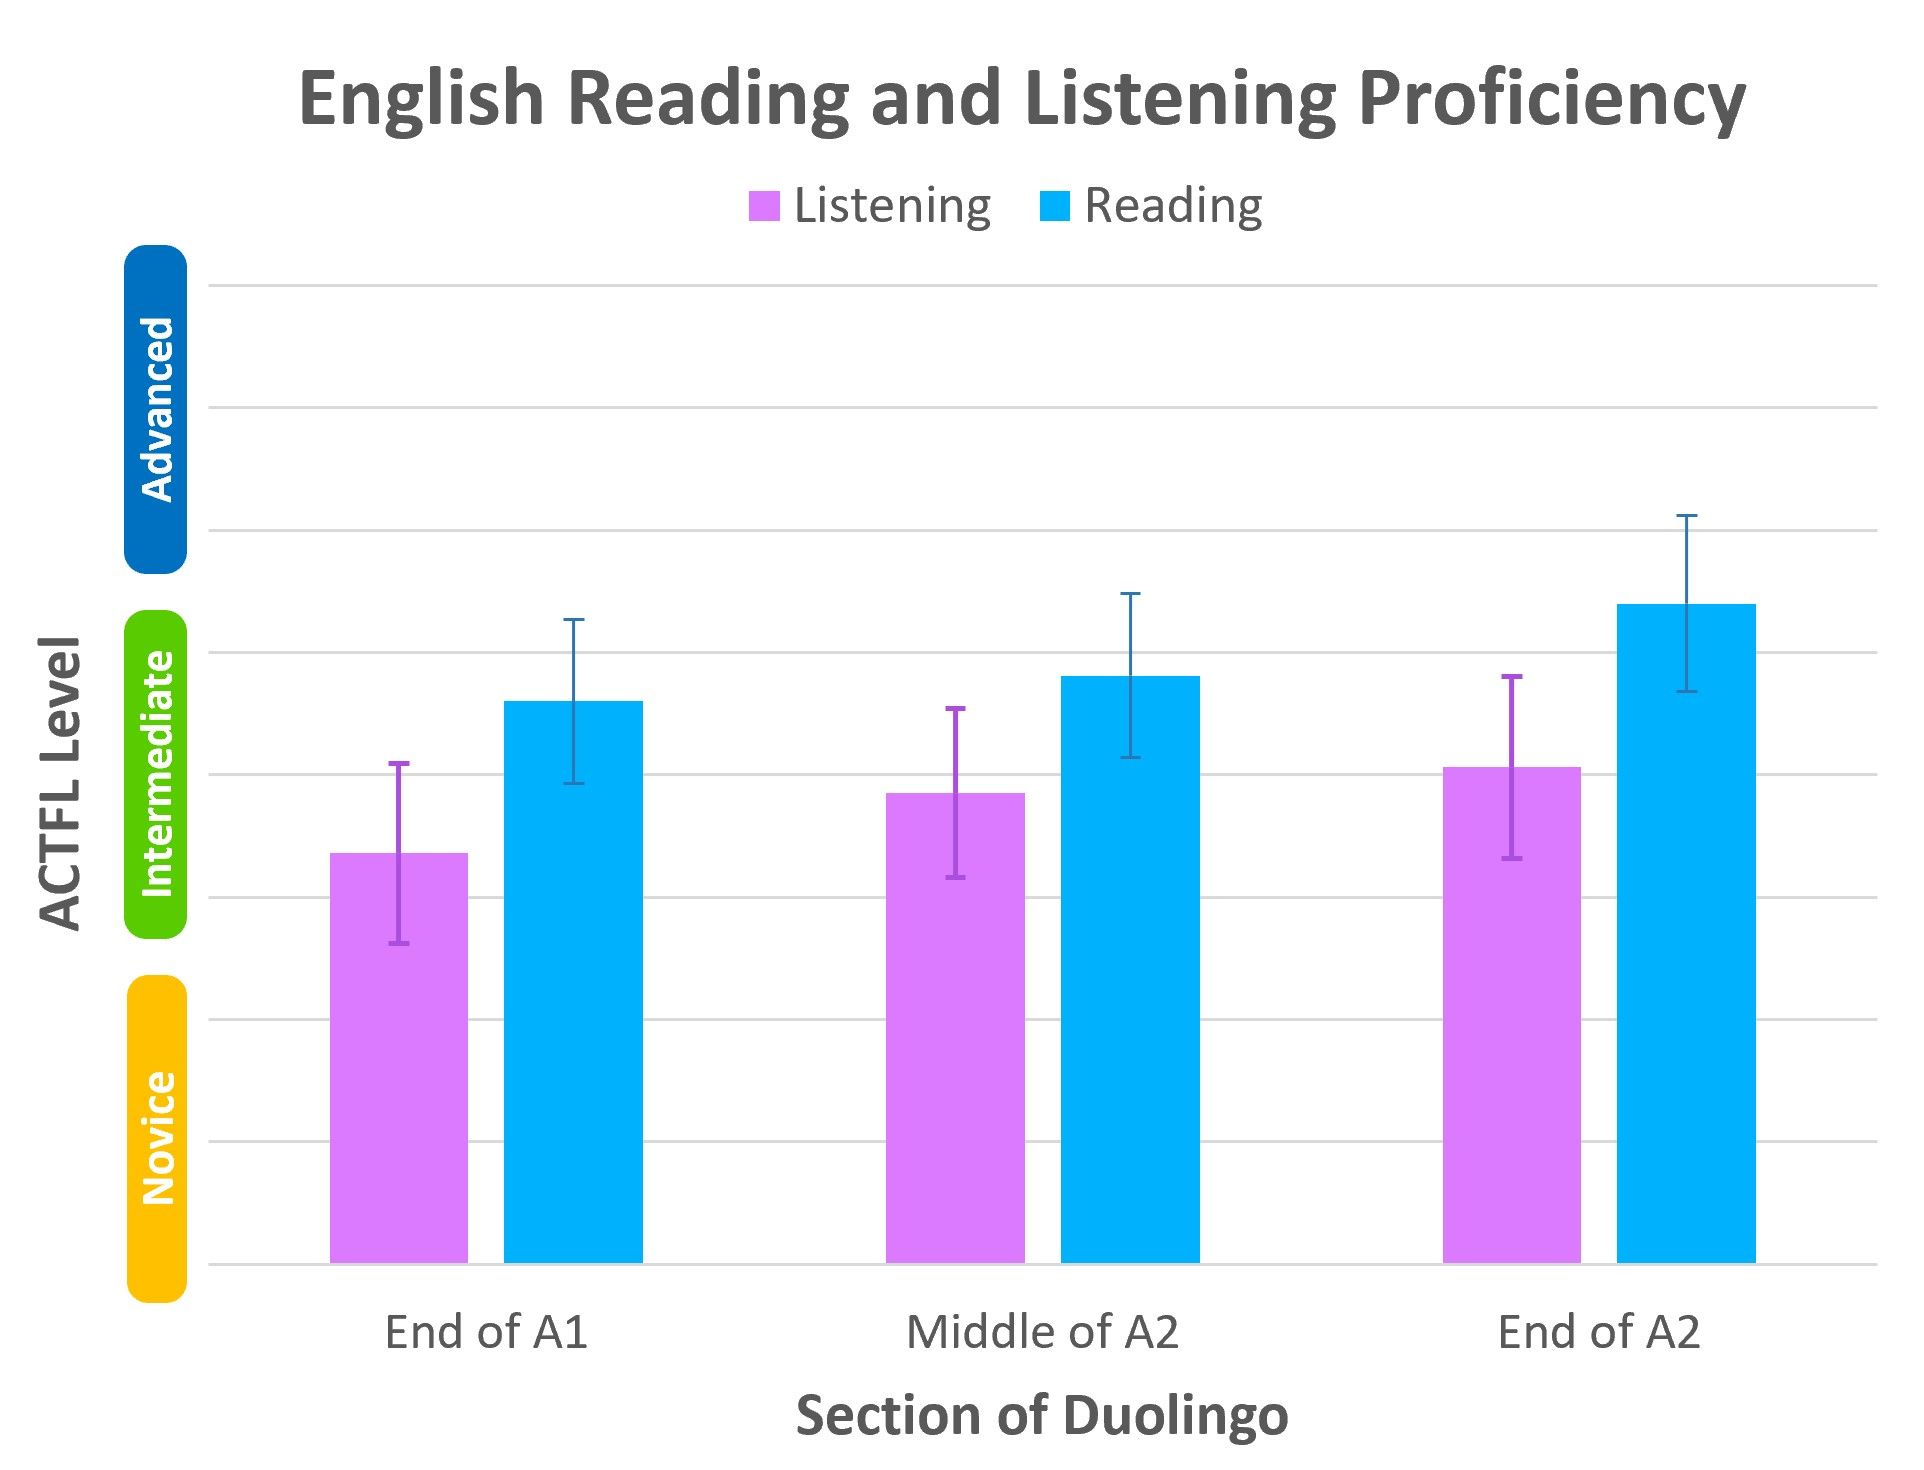 Bar chart of English Reading and Listening Proficiency. On the horizontal x-axis are the three Sections of Duolingo: End of A1, Middle of A2, and End of A2. On the vertical y-axis is the ACTFL levels, with the bottom third labeled "Novice", the middle third "Intermediate", and the upper third "Advanced". There are a pair of bars for each Section of Duolingo, representing listening scores and reading scores. For each pair, both bars reach into the intermediate range and the reading scores are higher than the listening scores. From End of A1 to end of A2, the bars gradually get higher, and the final bar for reading at end of A2, it reaches the highest part of the intermediate section.